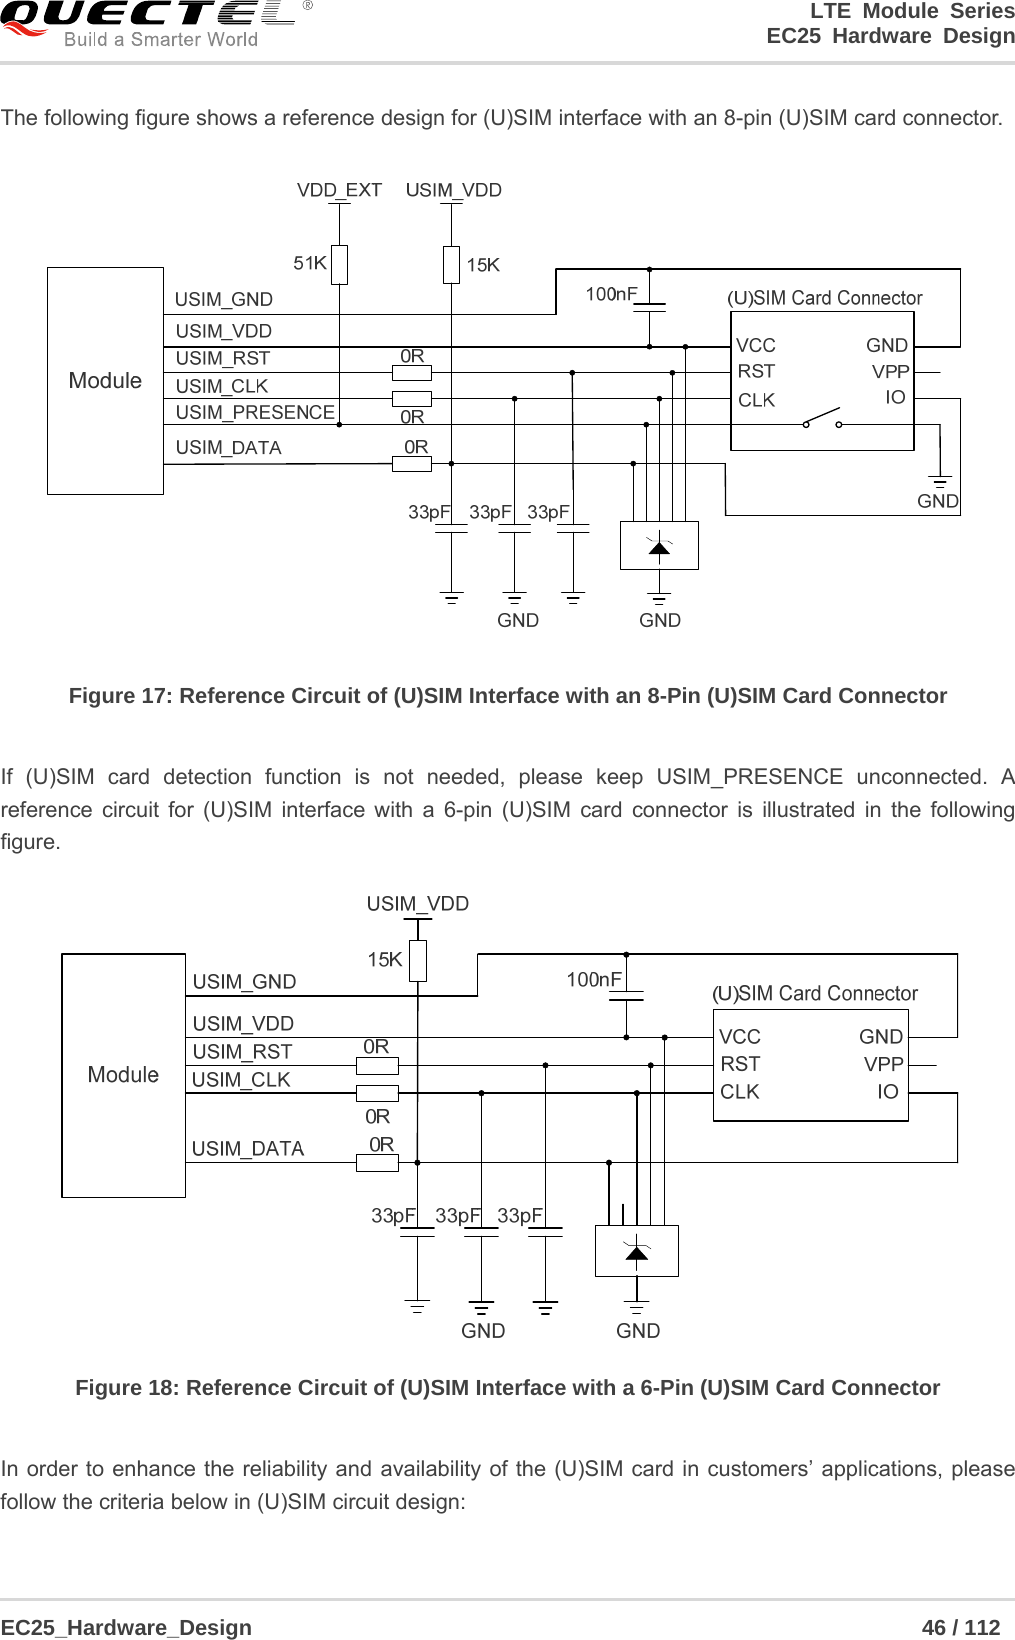 LTE Module Series                                                  EC25 Hardware Design  EC25_Hardware_Design                                                             46 / 112    The following figure shows a reference design for (U)SIM interface with an 8-pin (U)SIM card connector.  Figure 17: Reference Circuit of (U)SIM Interface with an 8-Pin (U)SIM Card Connector  If (U)SIM card detection function is not needed, please keep USIM_PRESENCE unconnected. A reference circuit for (U)SIM interface with a 6-pin (U)SIM card connector is illustrated in the following figure.  Figure 18: Reference Circuit of (U)SIM Interface with a 6-Pin (U)SIM Card Connector  In order to enhance the reliability and availability of the (U)SIM card in customers’ applications, please follow the criteria below in (U)SIM circuit design:  